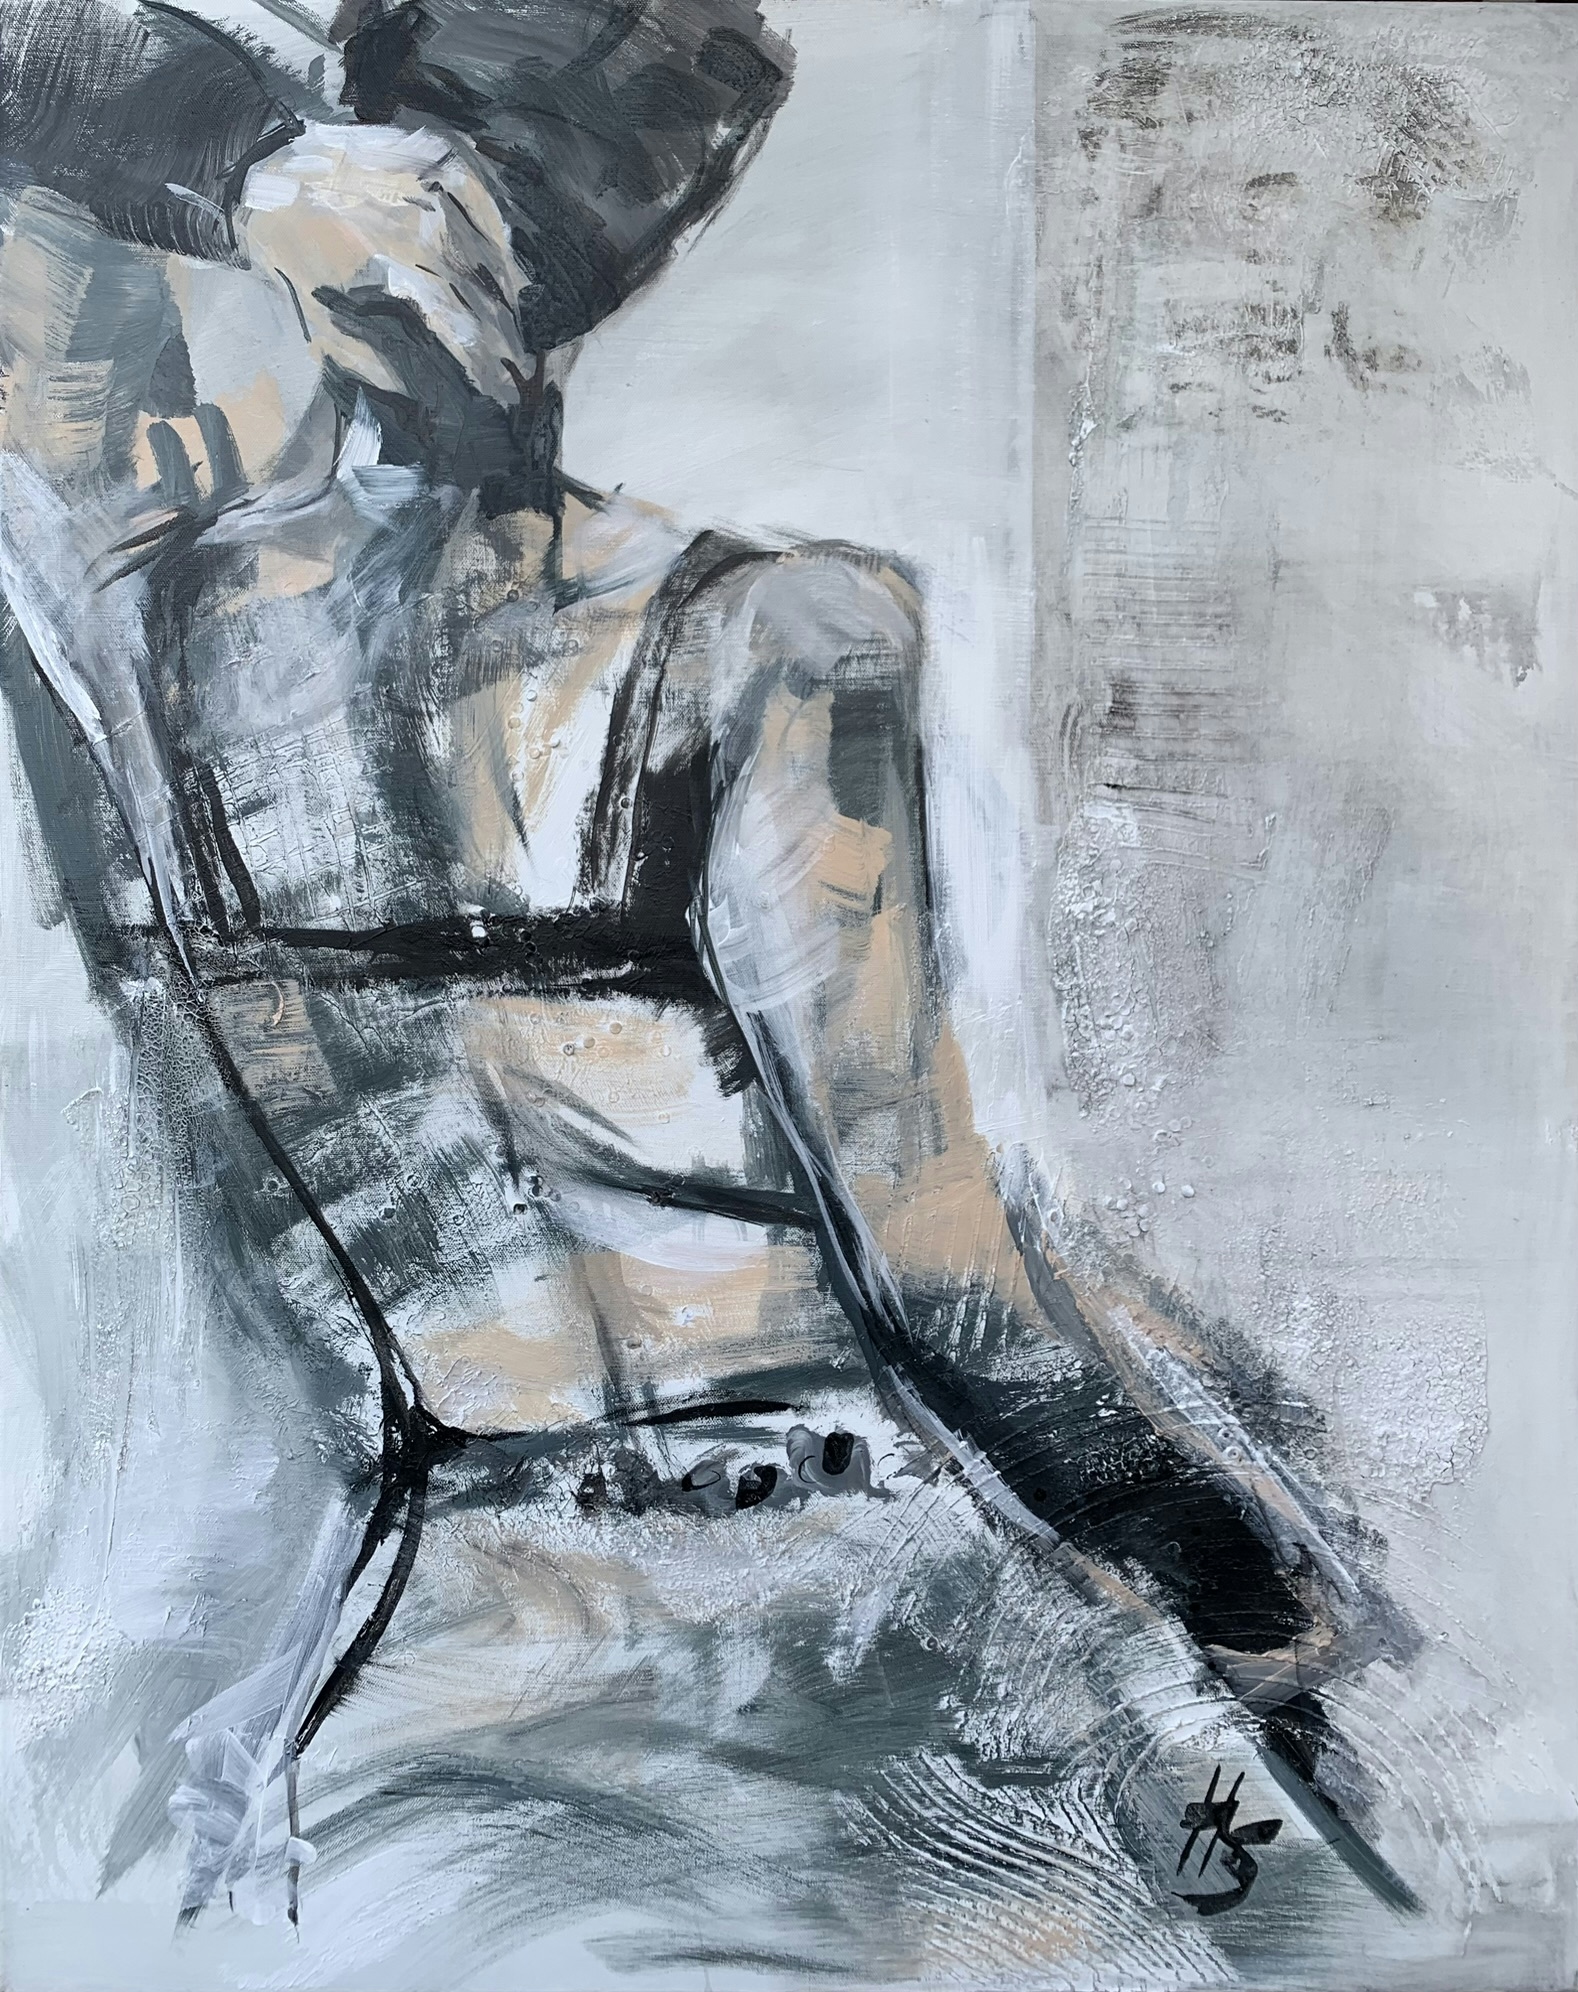 Artwork by Heike Schümann depicts a standing woman from behind in a casual pose